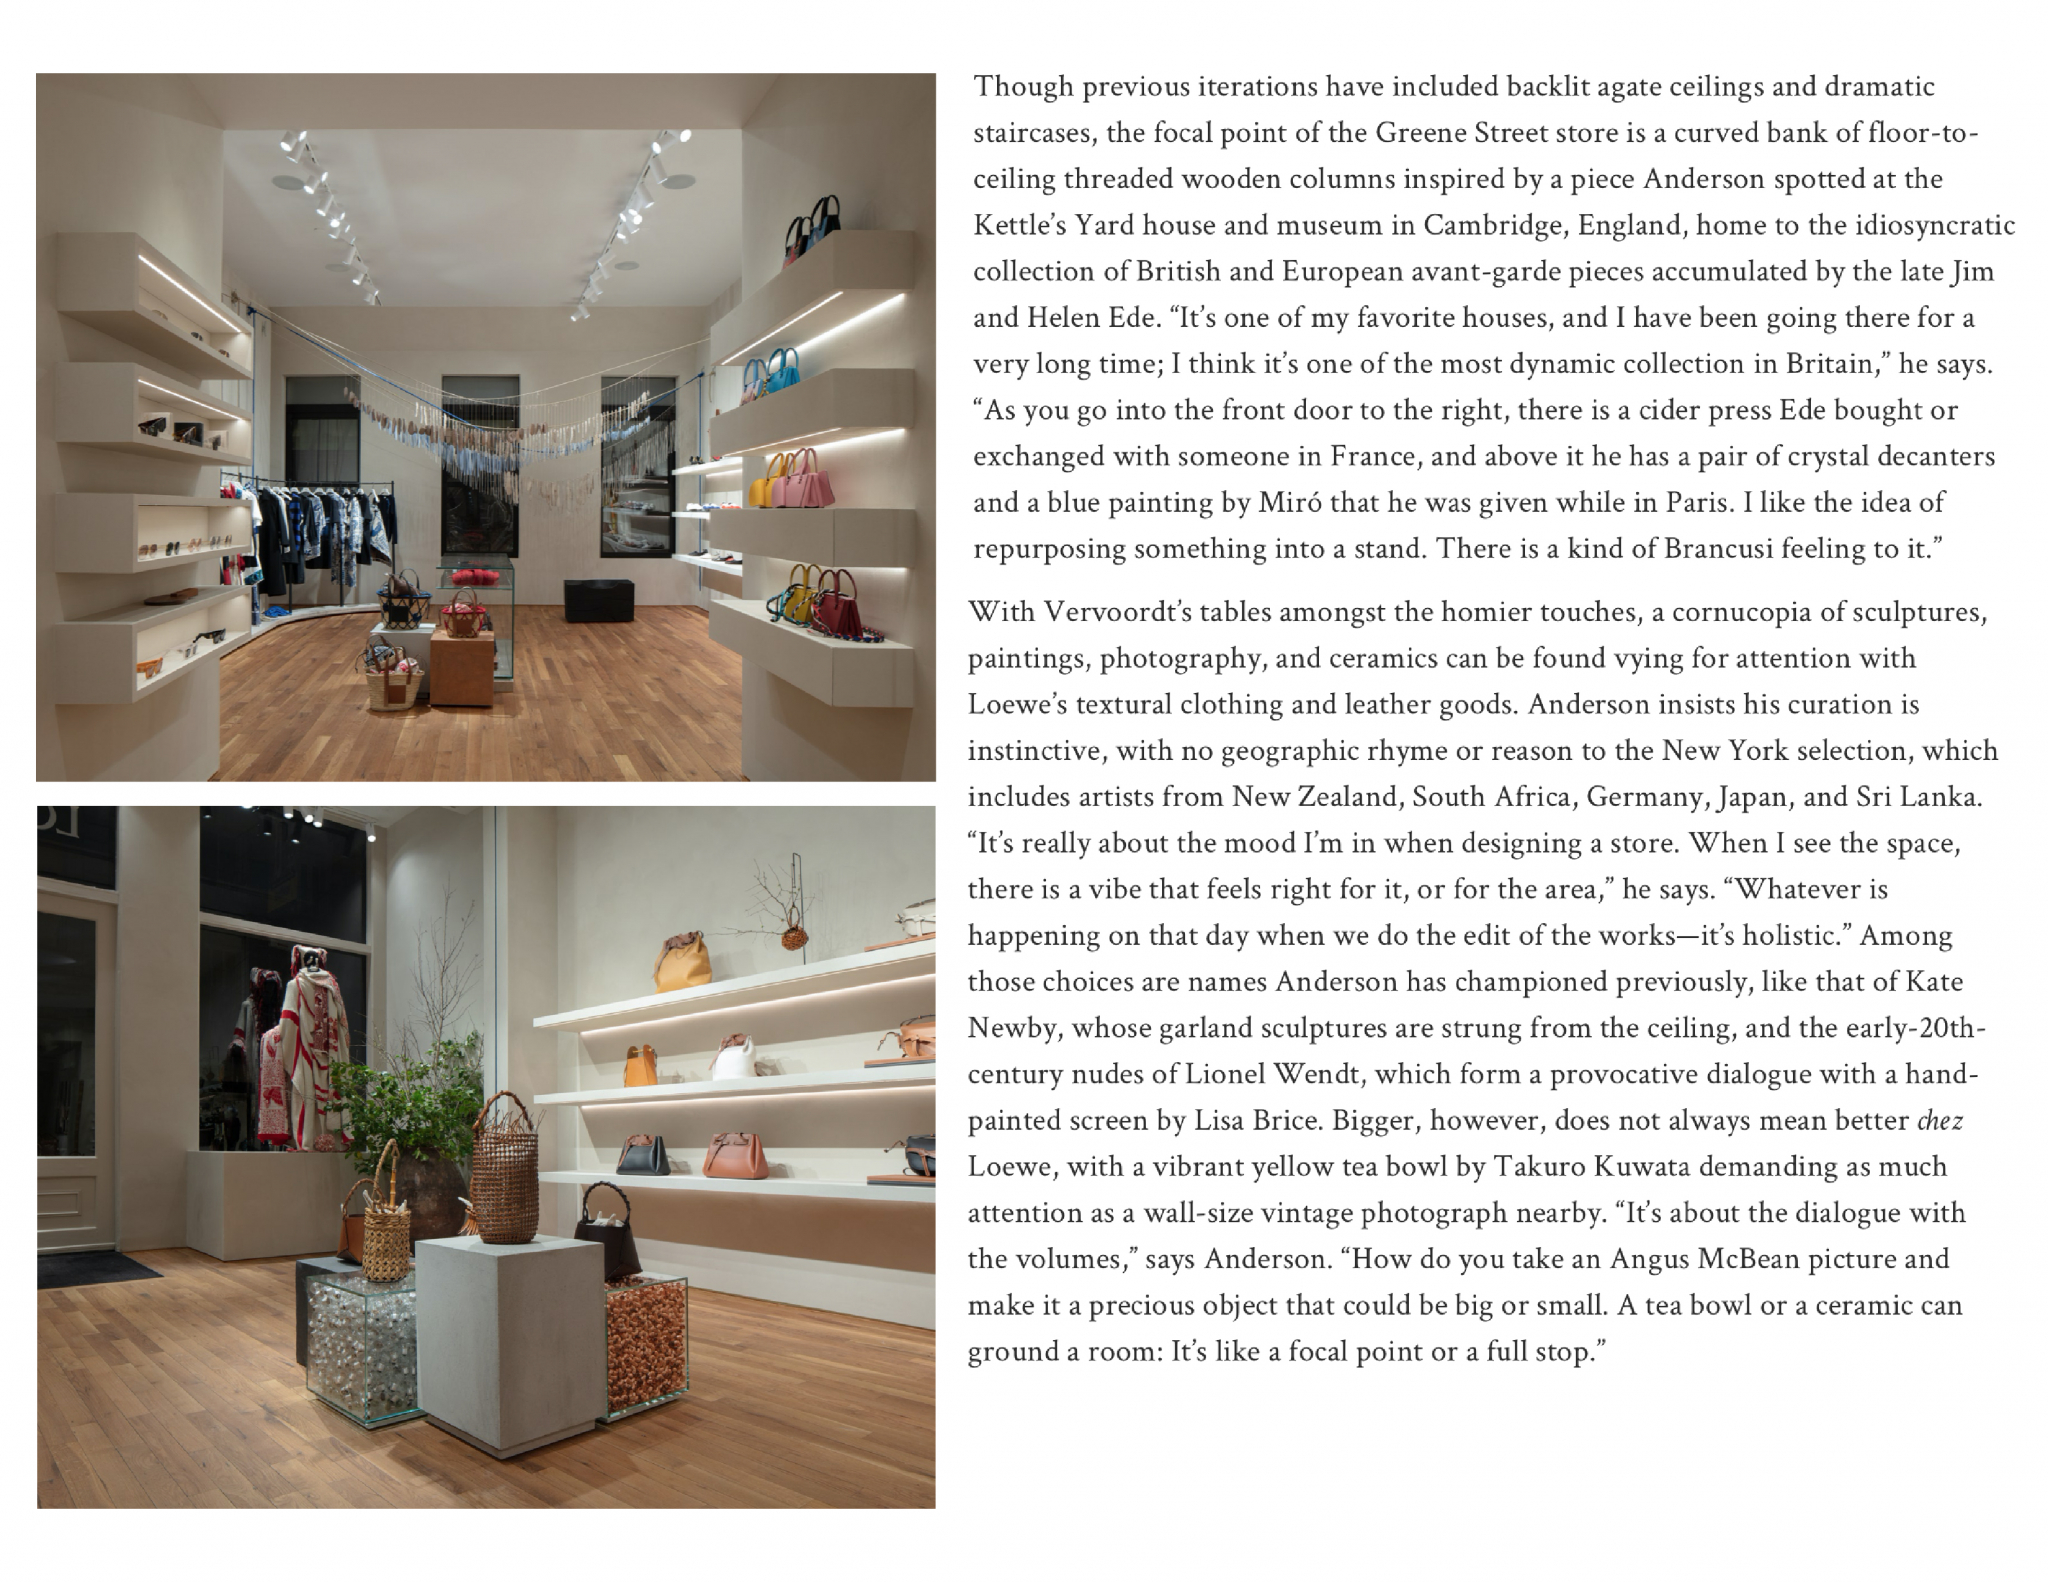 Dan Thawley | Architectural Digest: Loewe's NYC Flagship | 2